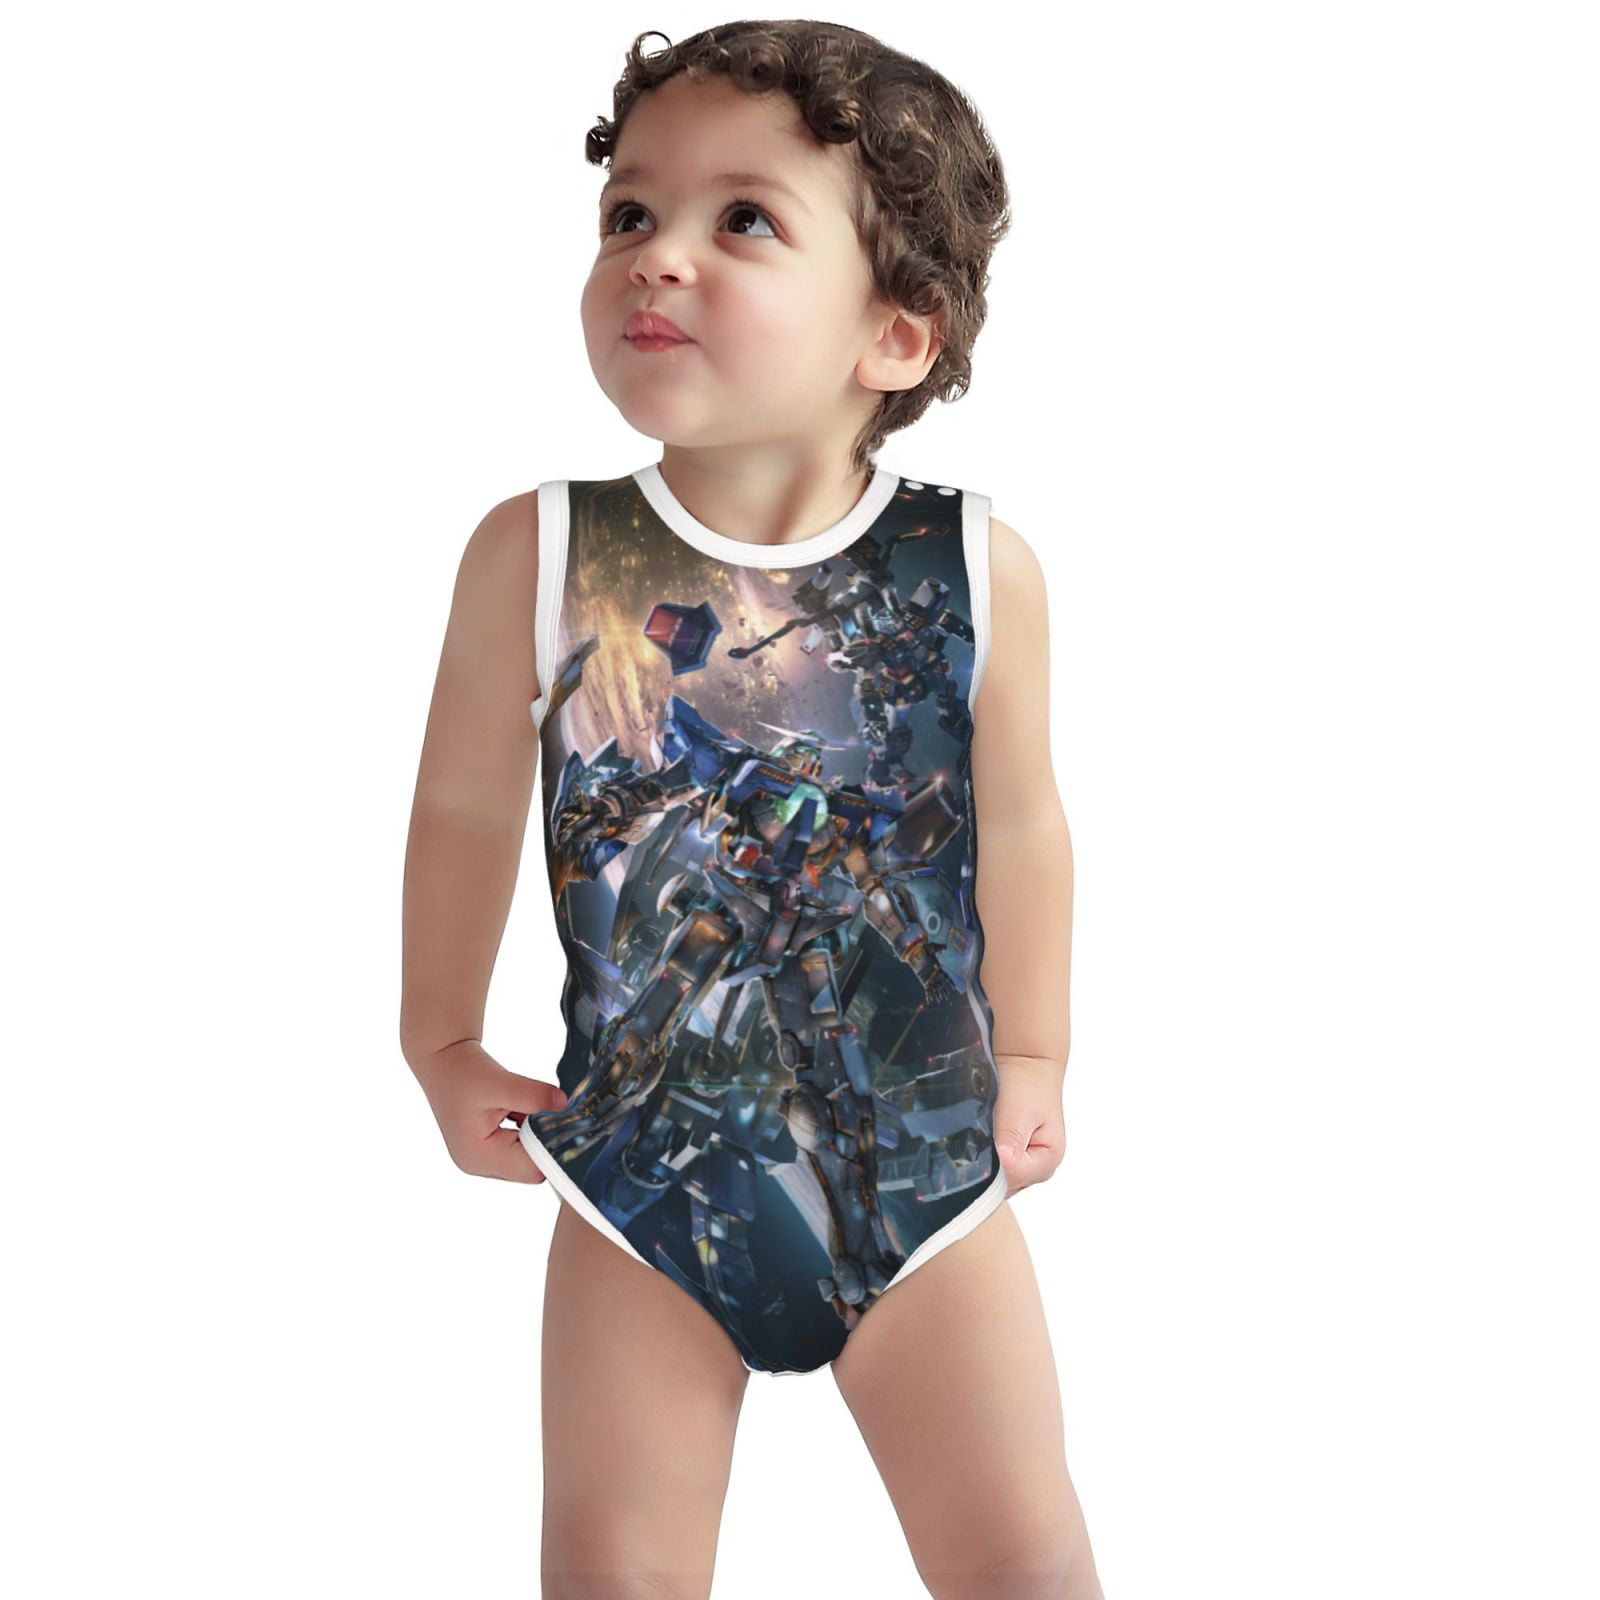 20% OFF Tappers and Pointers Children's Short Sleeve Leotard RAD Colour SALE 